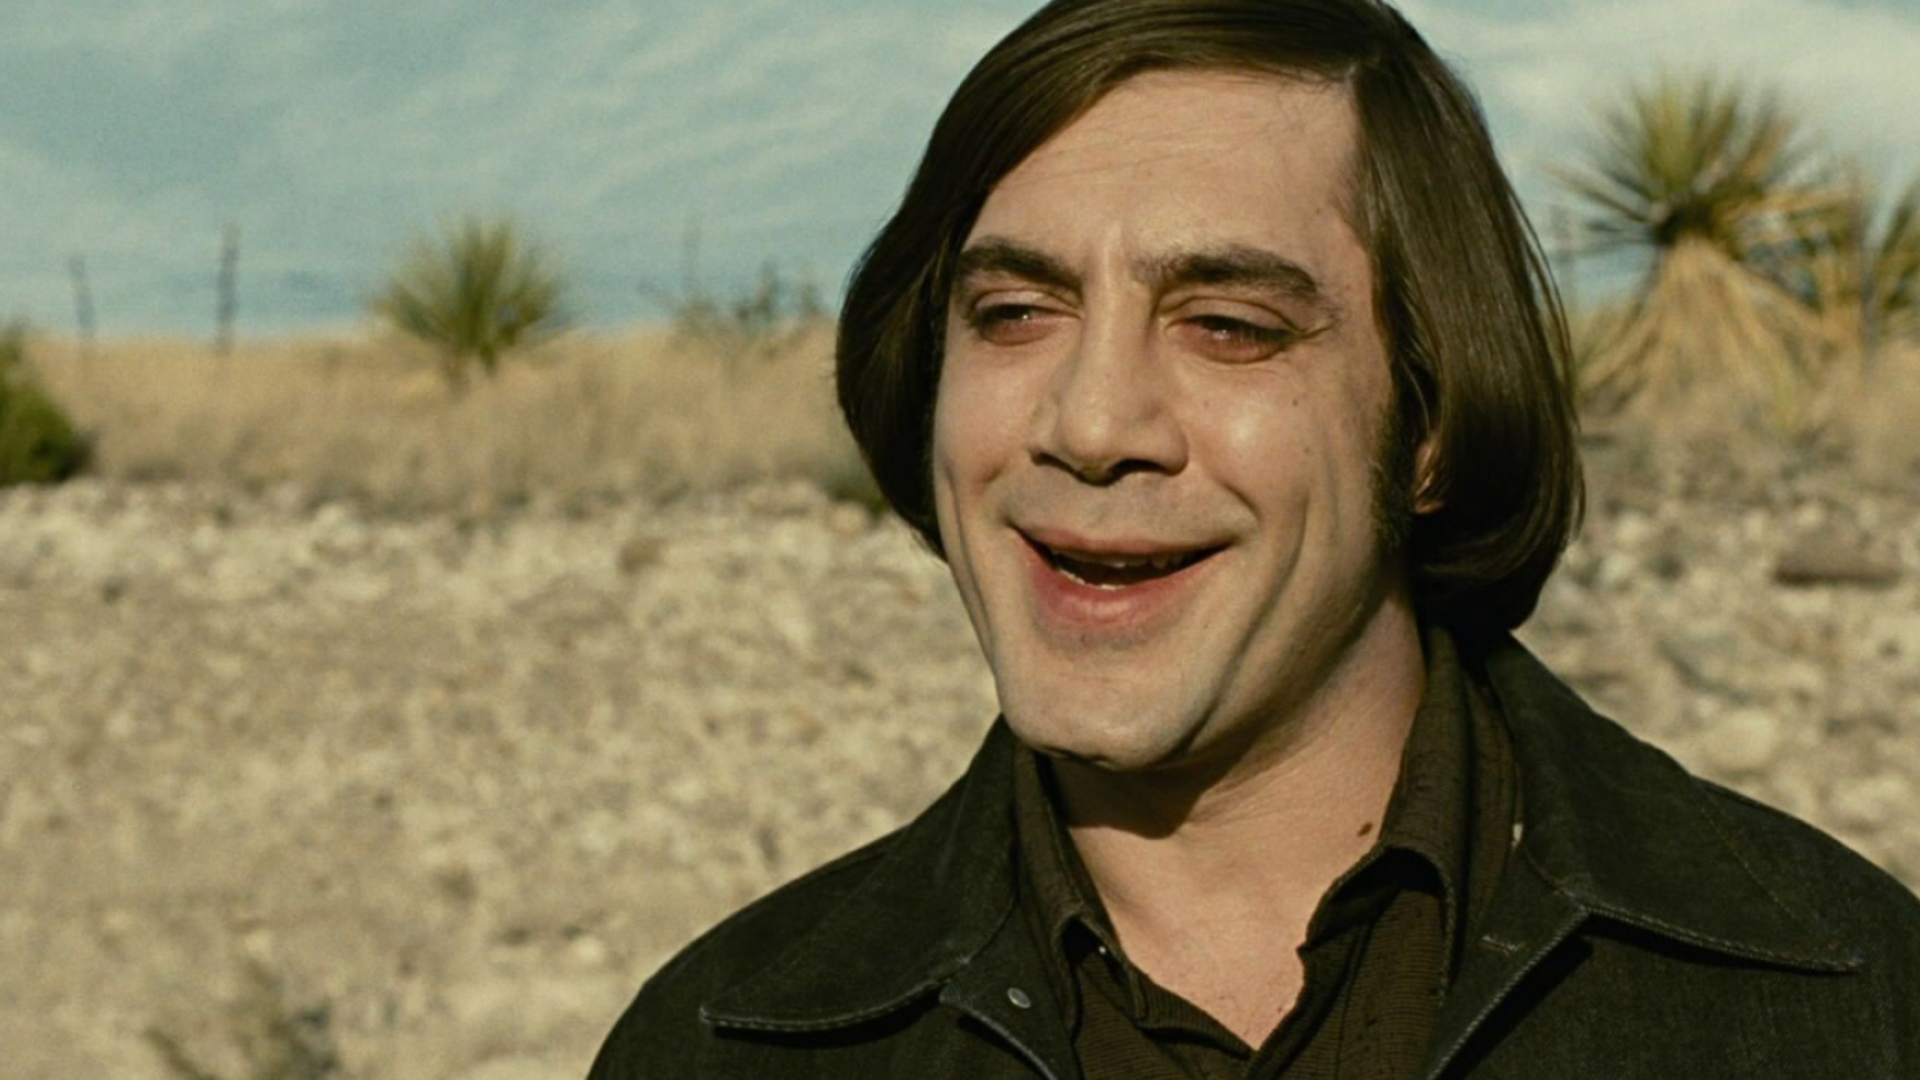 No Country For Old Men (Movie): Anton Chigurh's crazy smile, Javier Bardem, 2007 movie, AFI Movie of the Year. 1920x1080 Full HD Wallpaper.